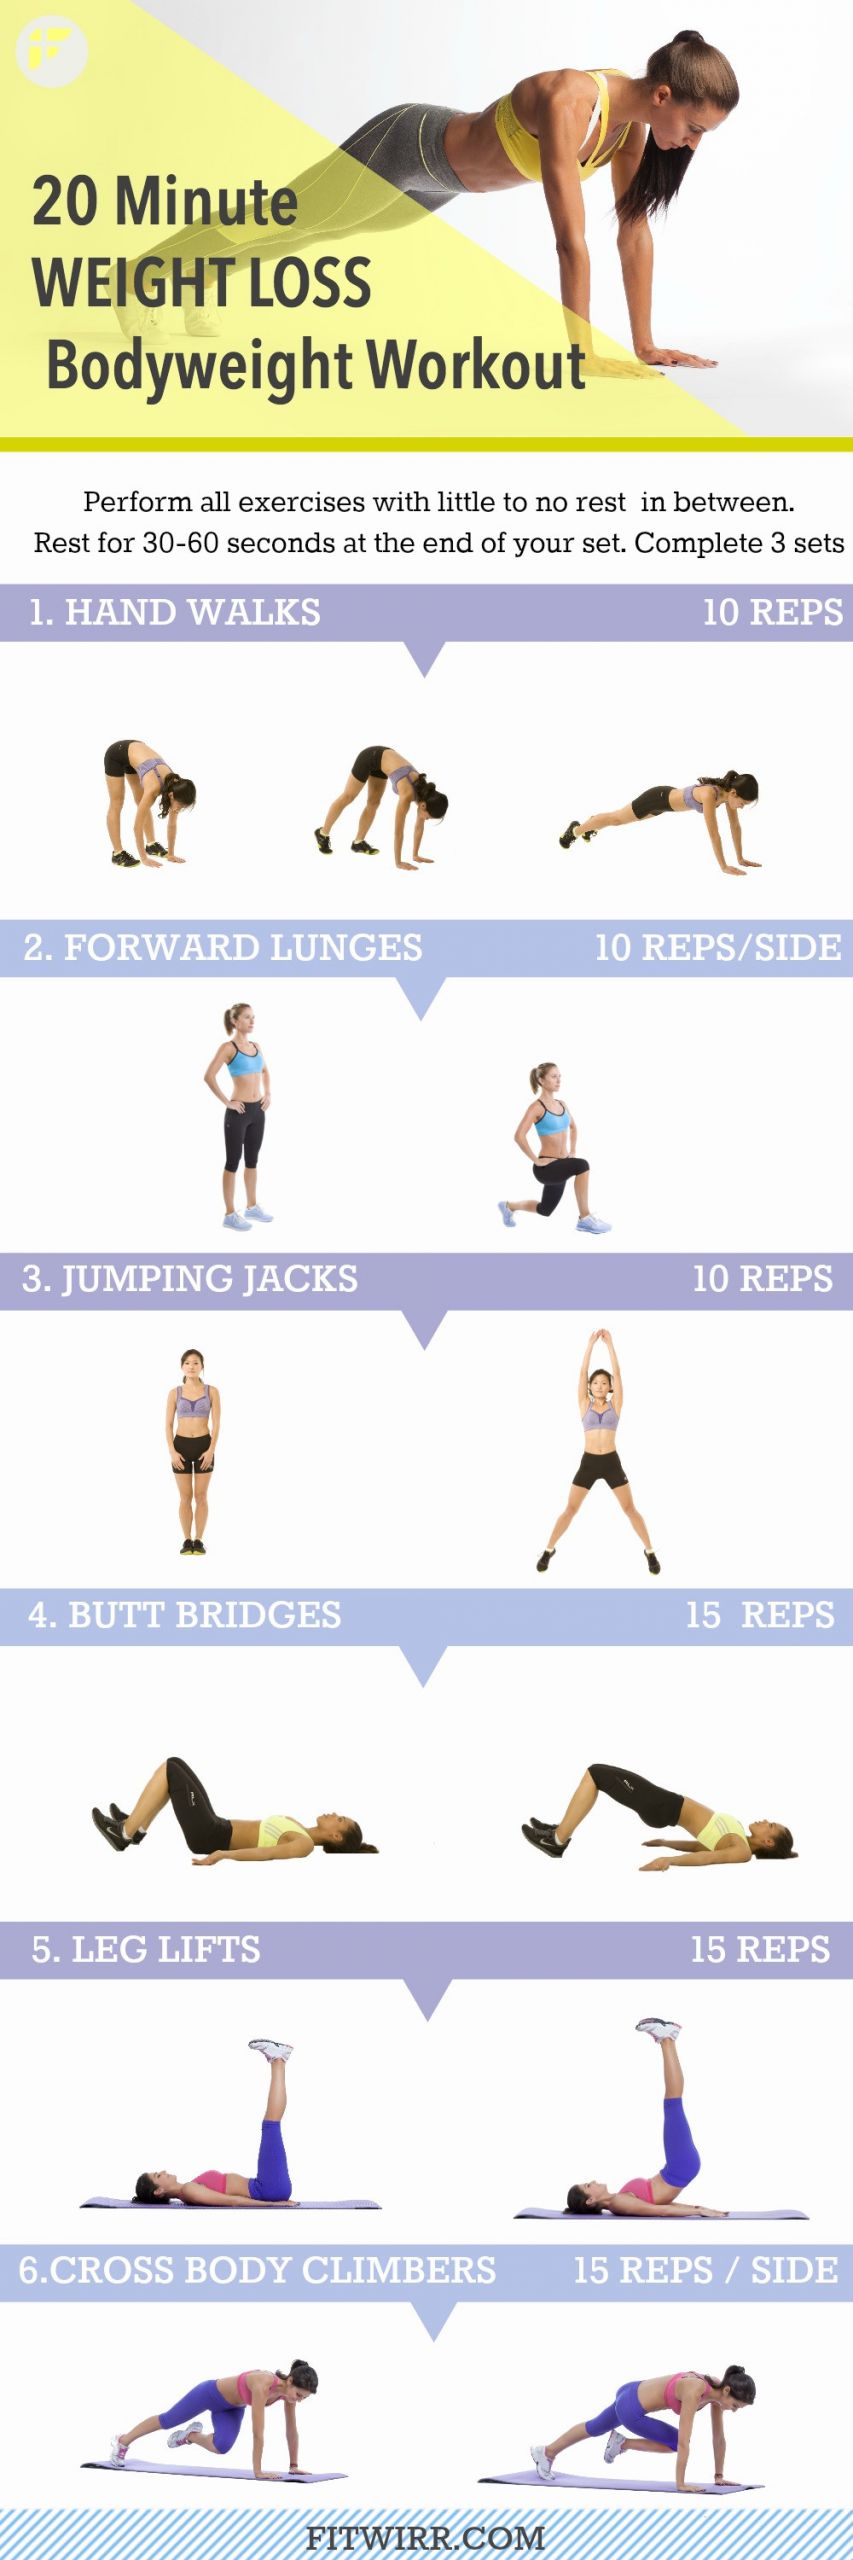 Best Weight Loss Exercises
 The Absolute Best Workout to Lose Weight Burn Fat and